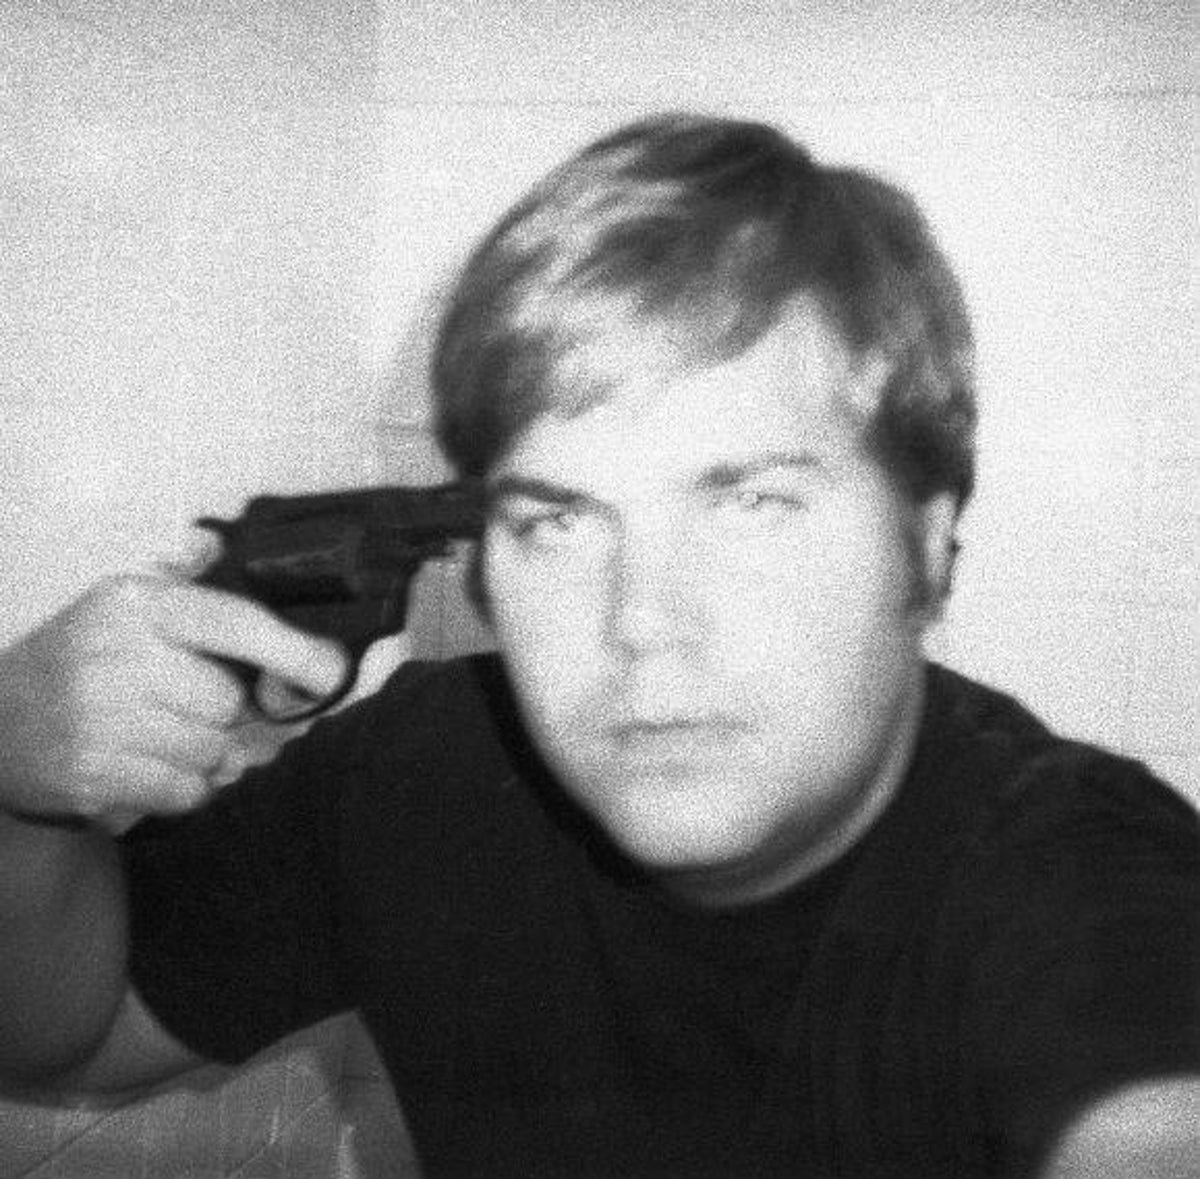 John Hinckley, Who Tried to Assassinate Ronald Reagan, Can Now